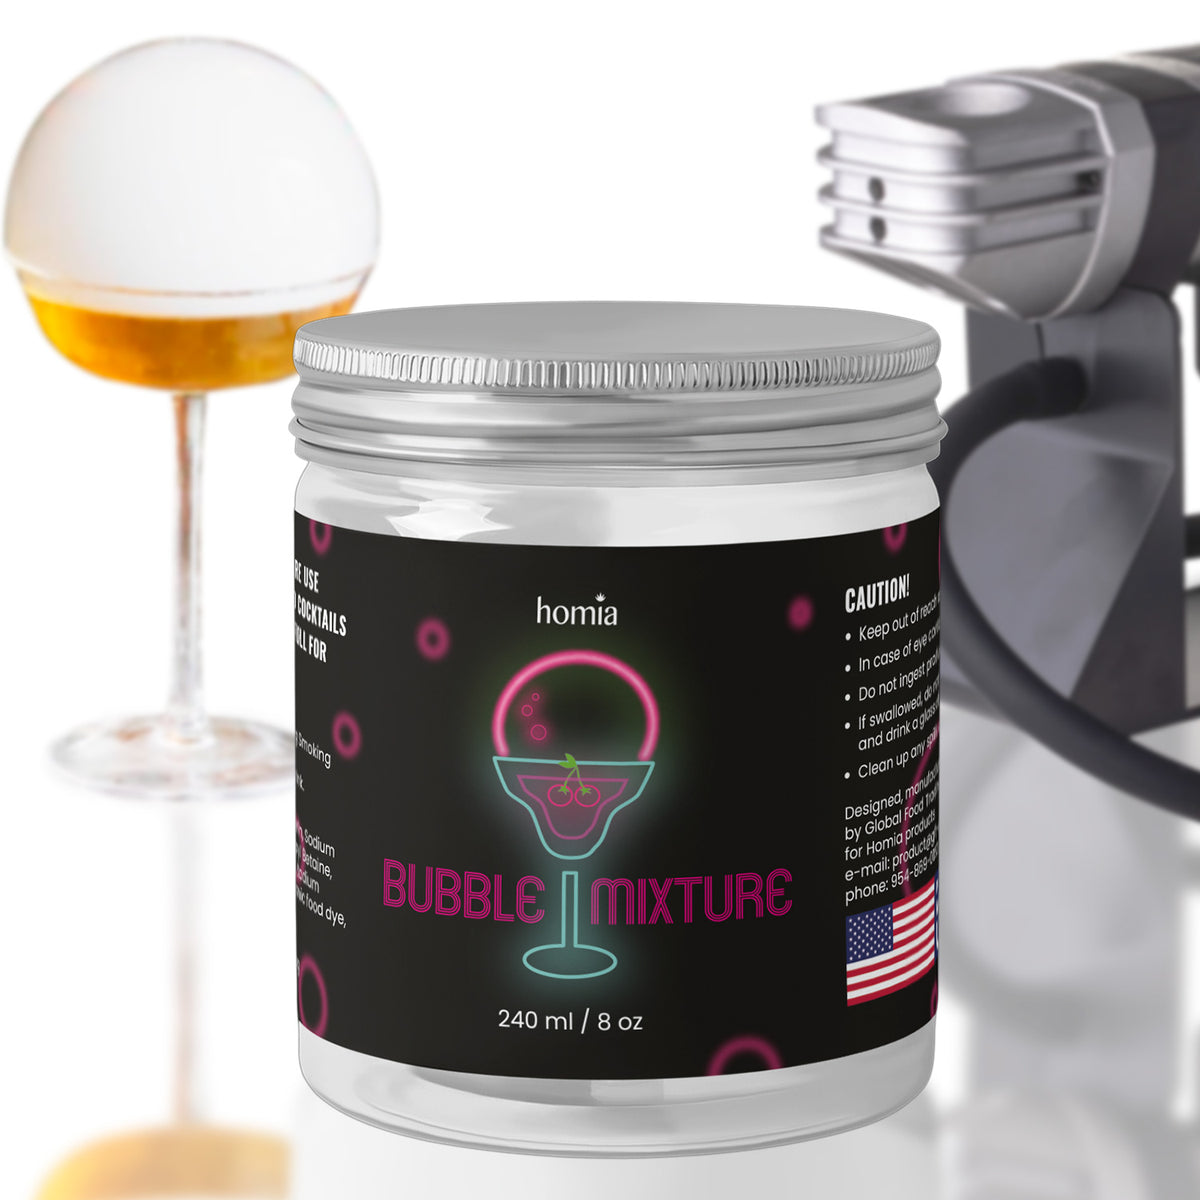 Smoke Bubbles Are Adding Aroma & Whimsy to Cocktails